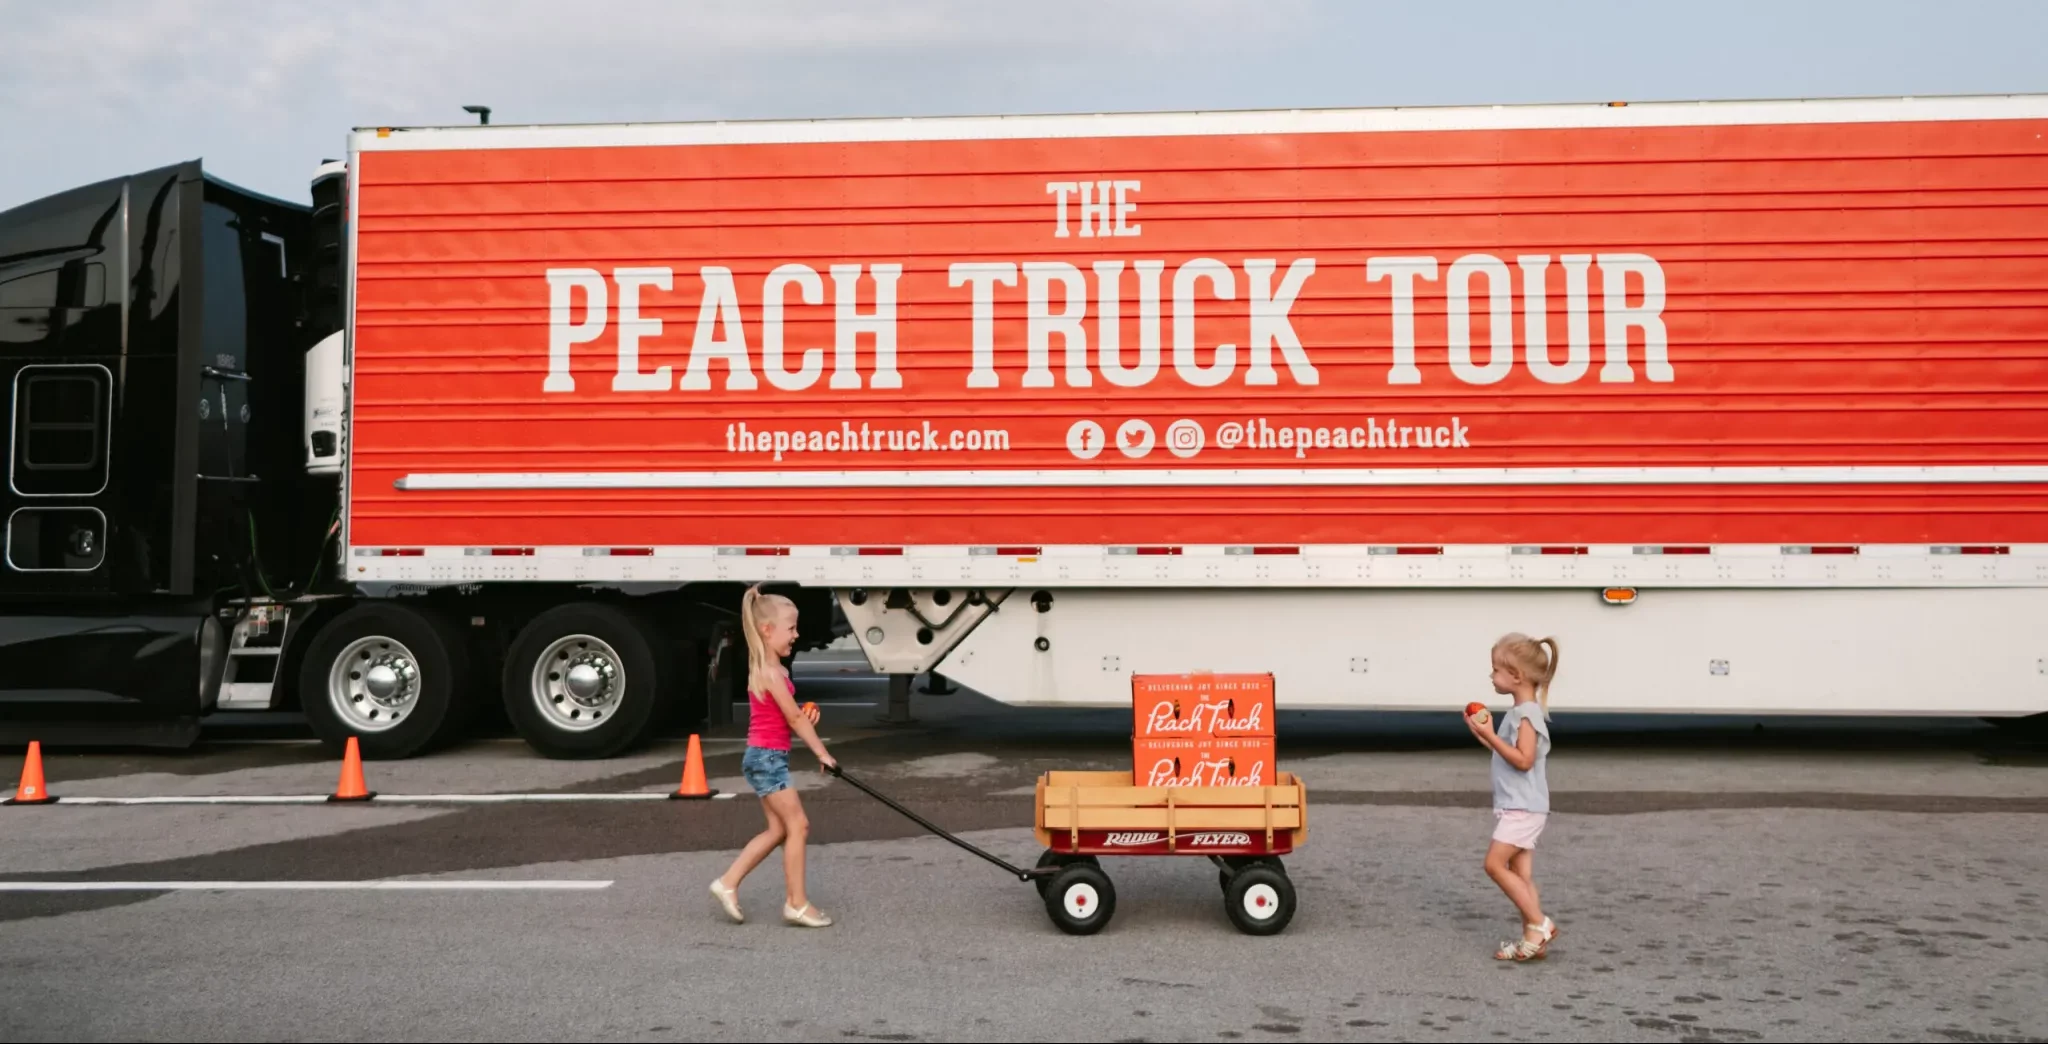 The Peach Truck Tour is coming to NH & MA in July! Pick up your Fresh